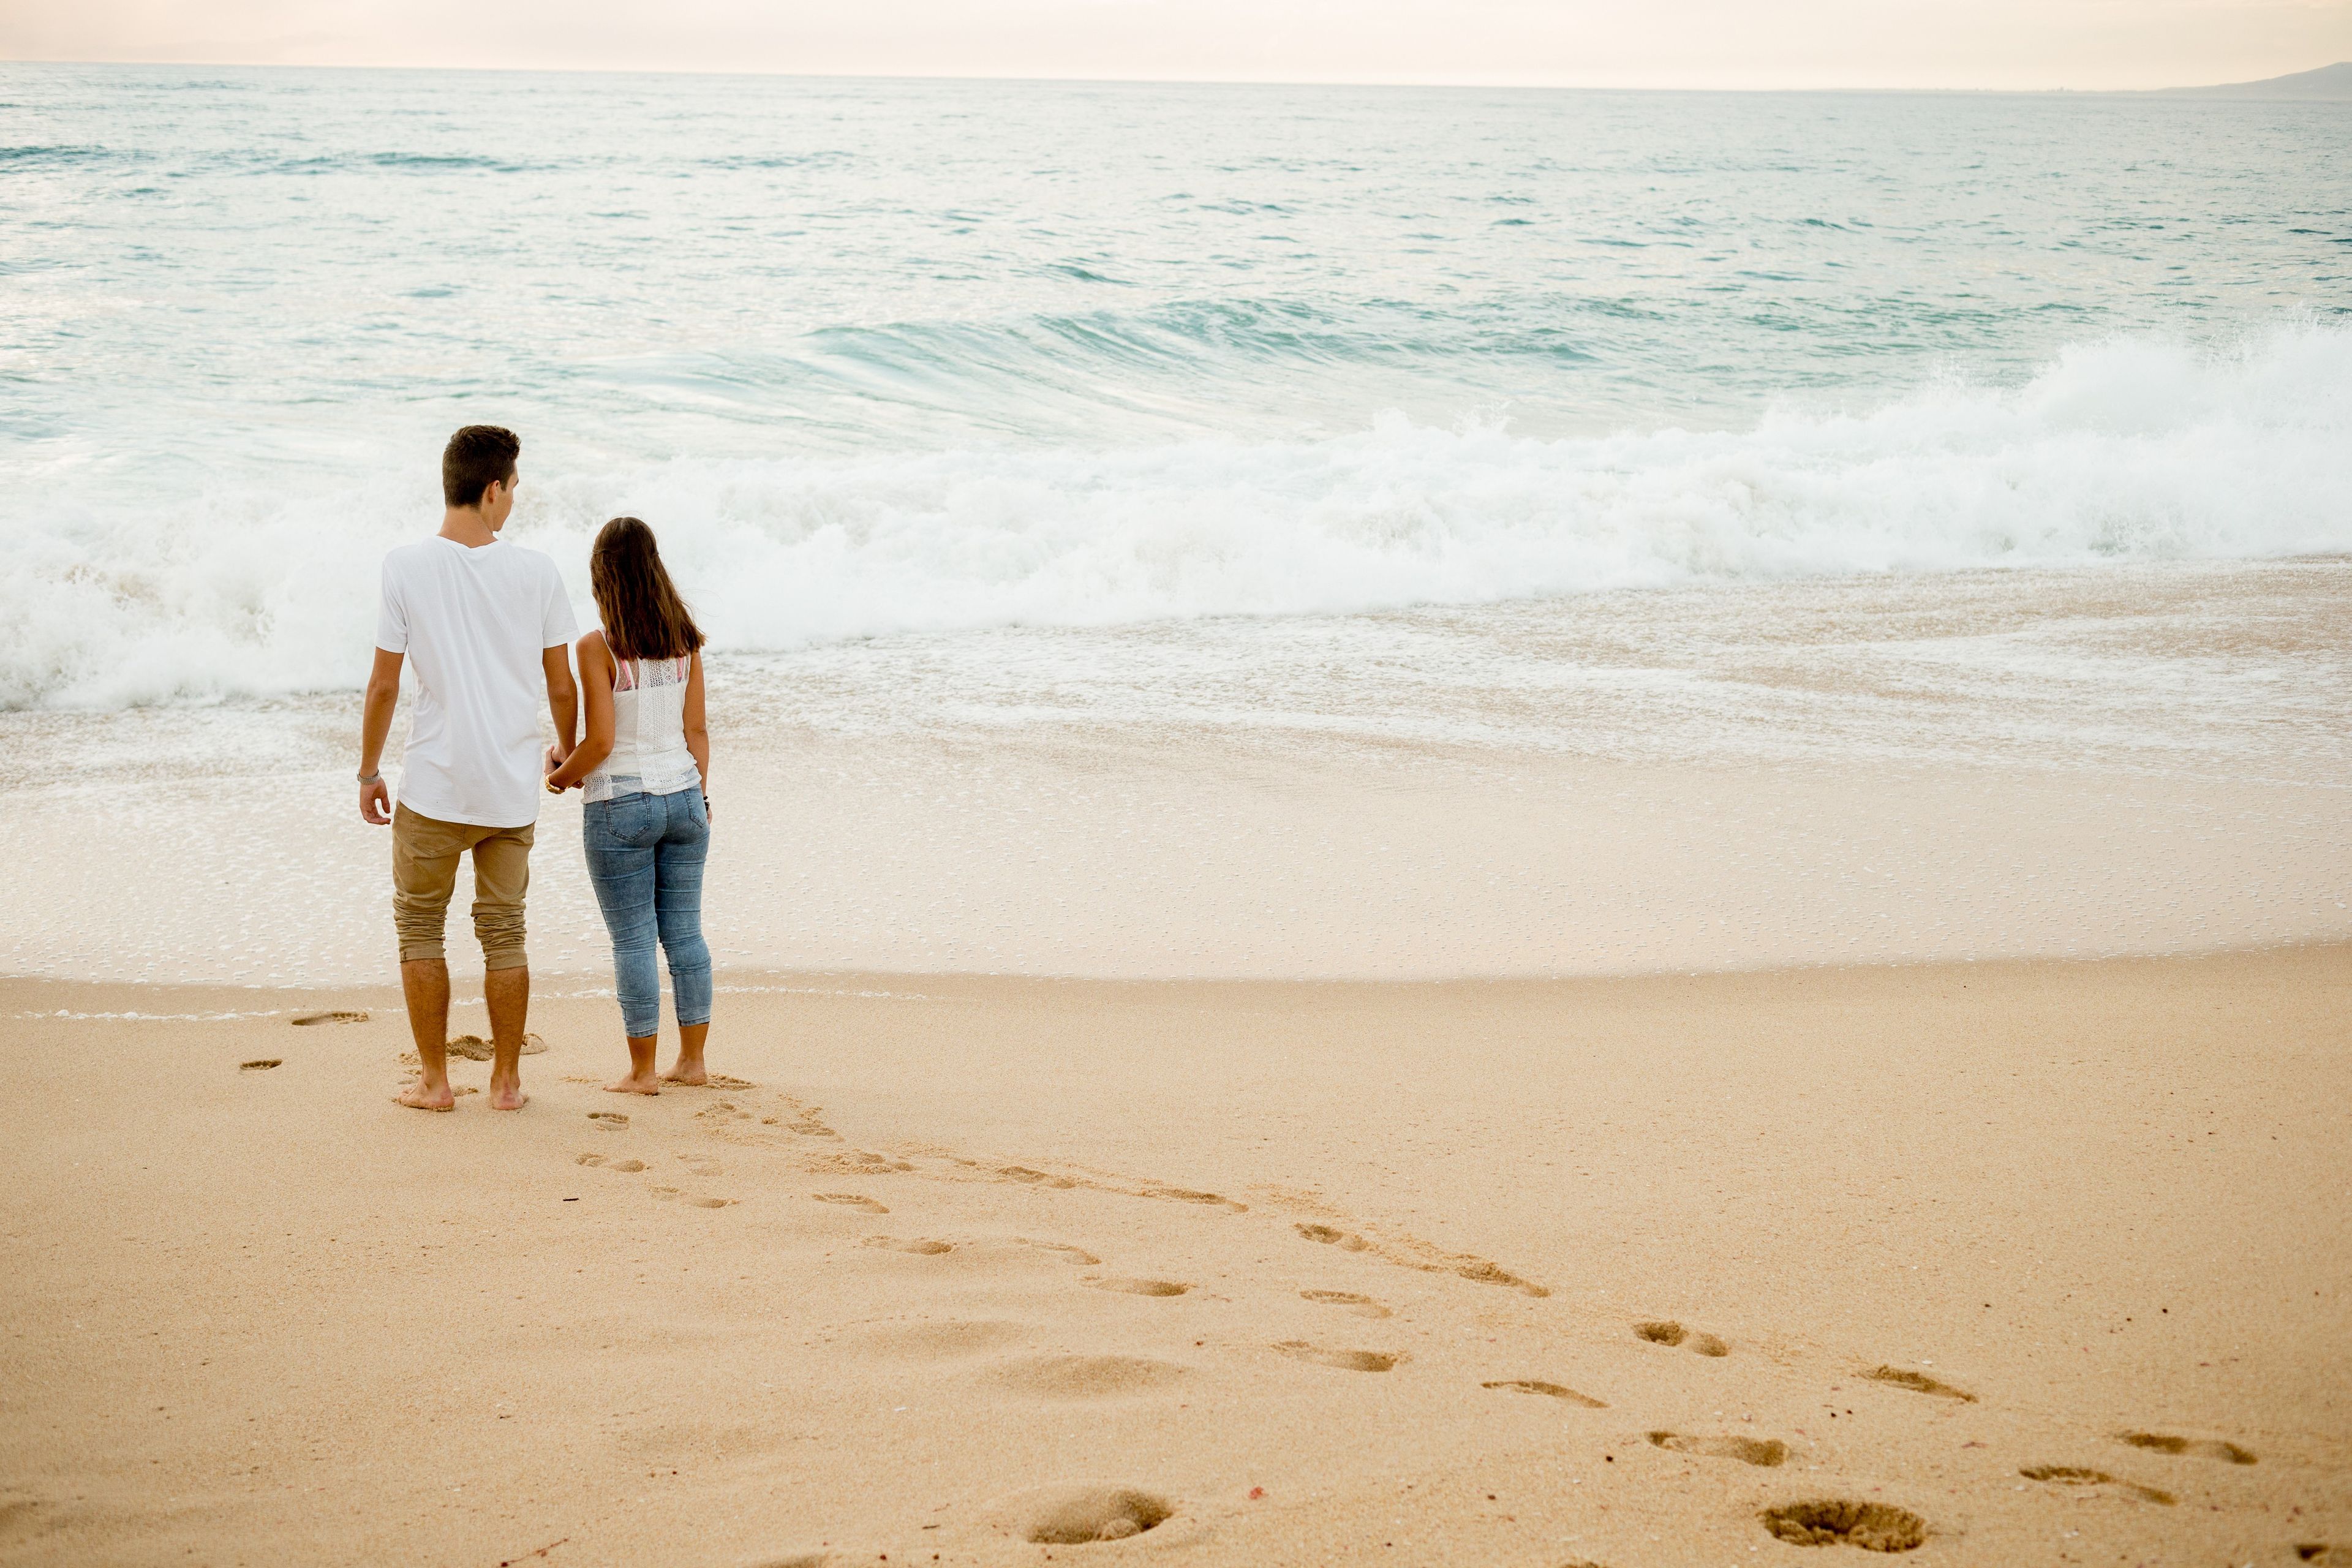 A young couple from Portugal standing on the beach and looking over the ocean.